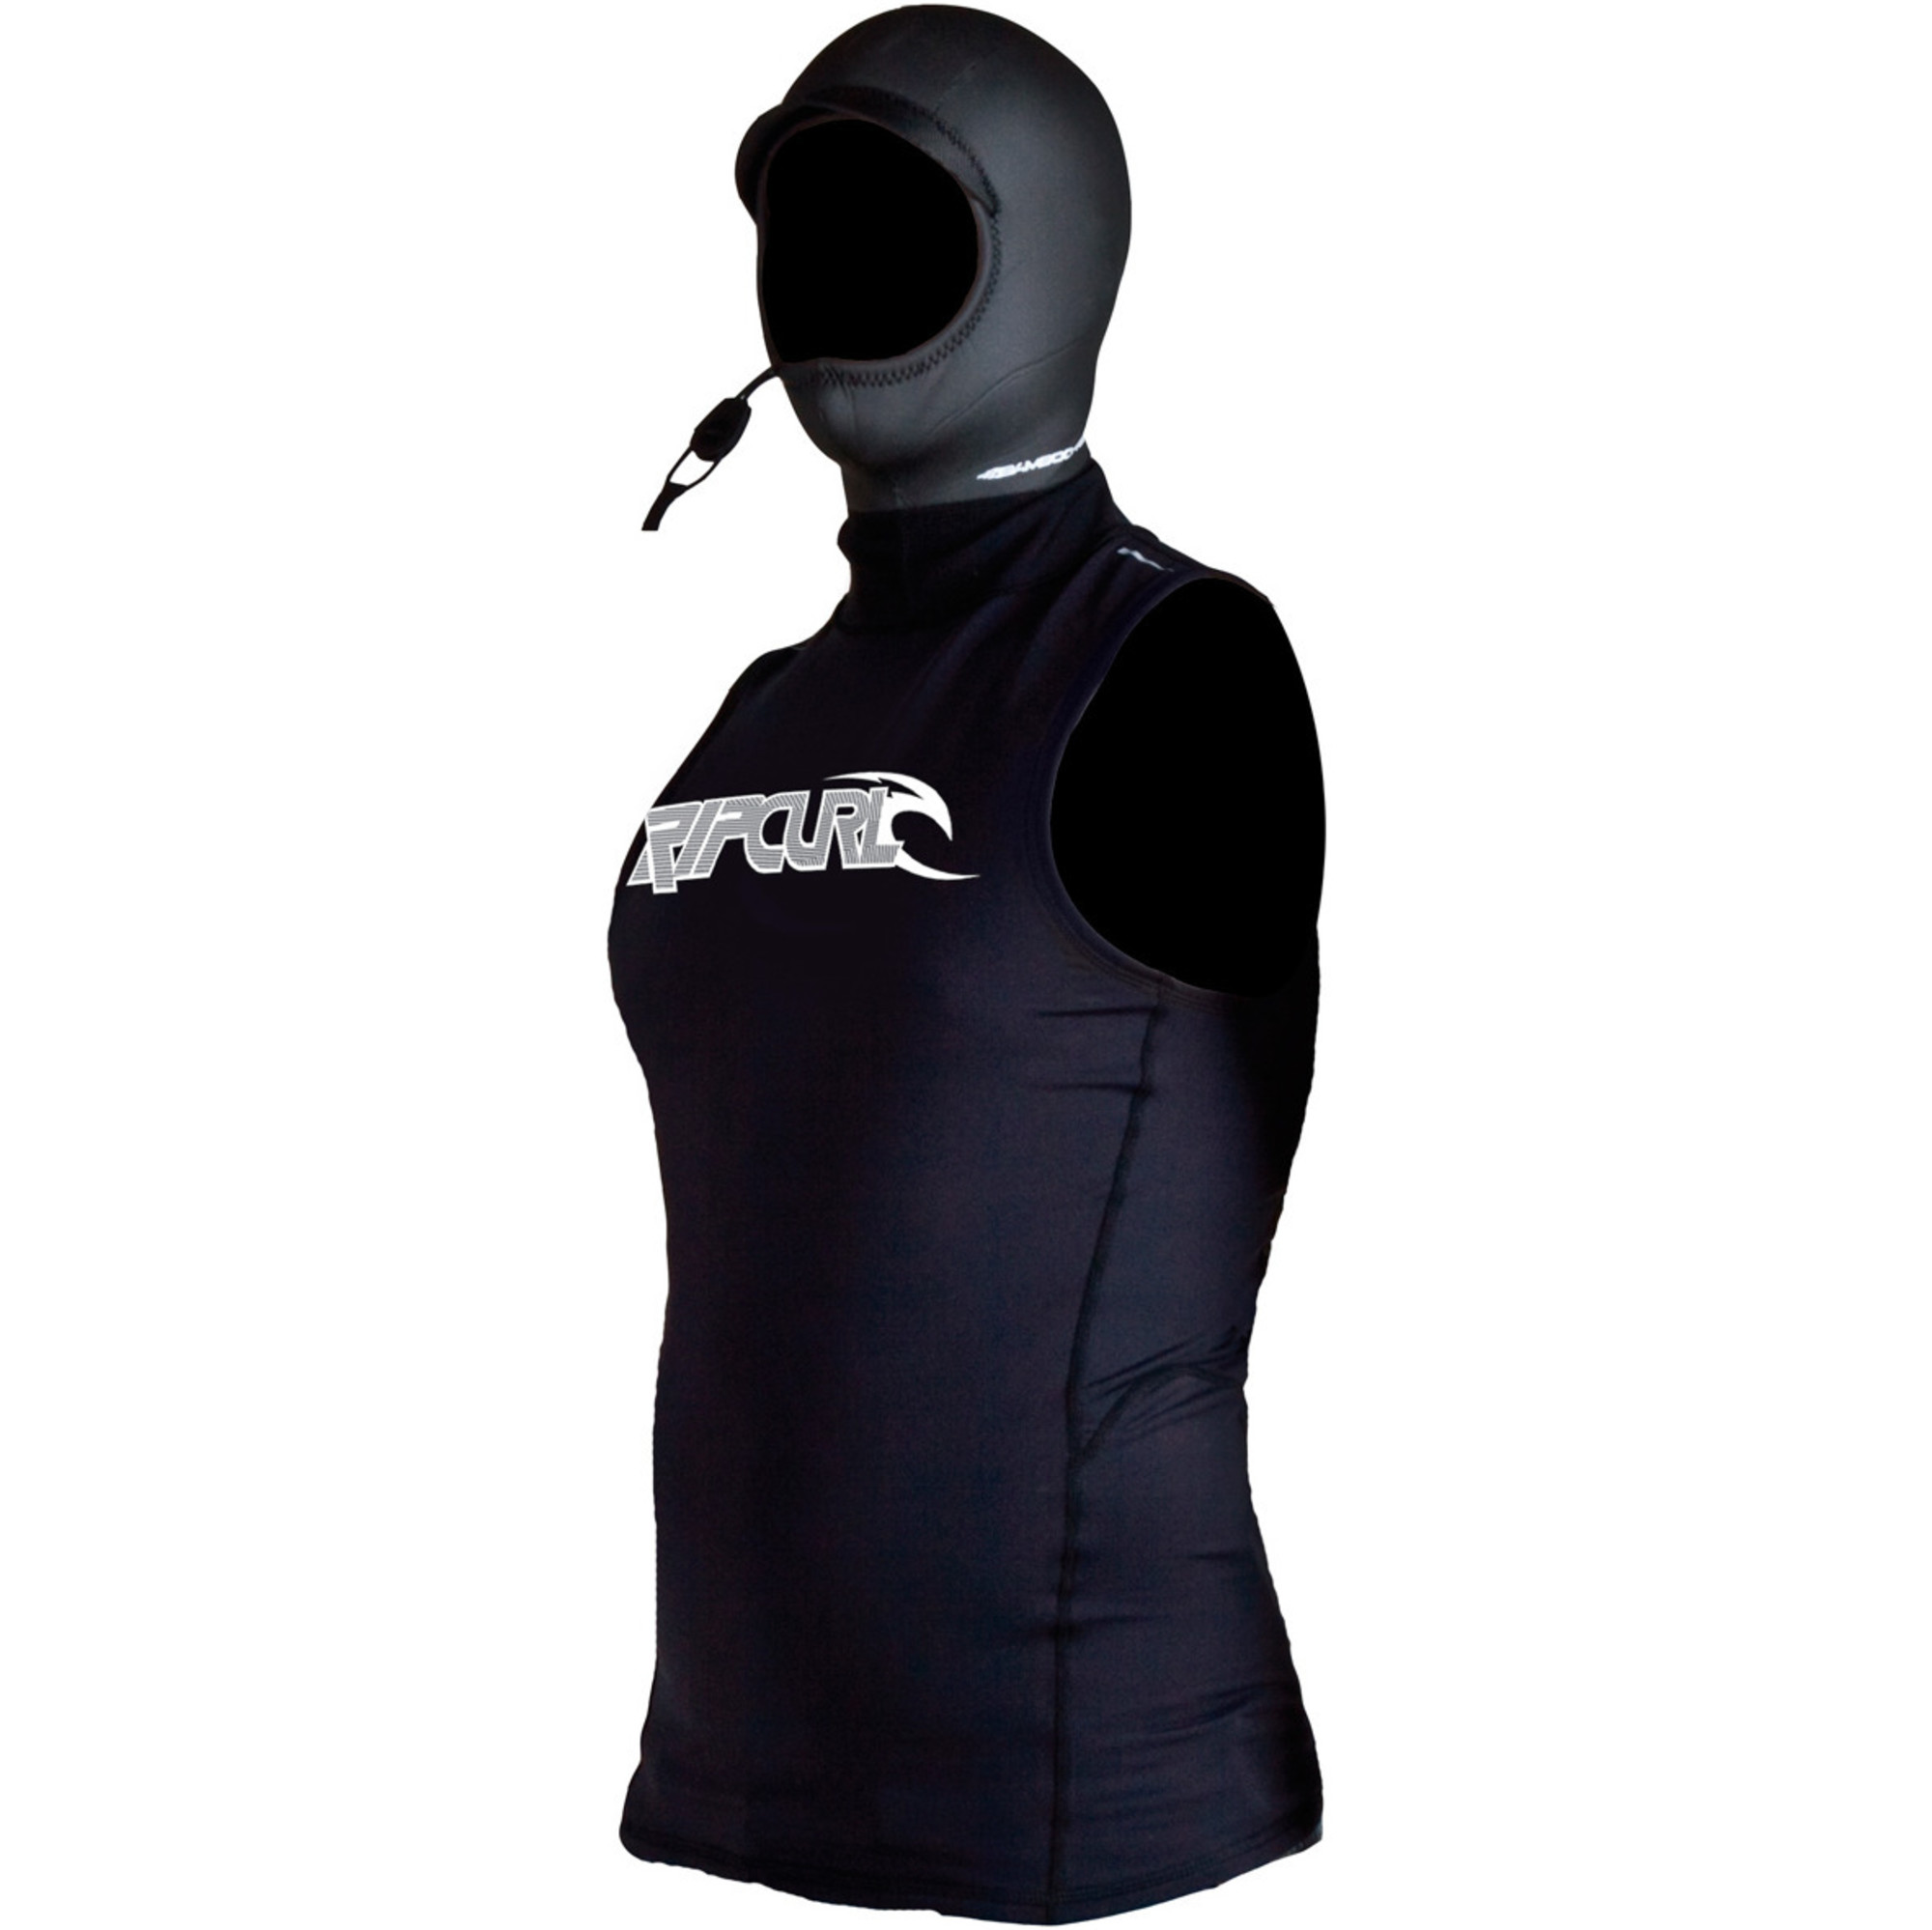 Rip Curl Flashbomb Hooded Thermo Vest in Black WVEXDM - Wetsuit Tops ...